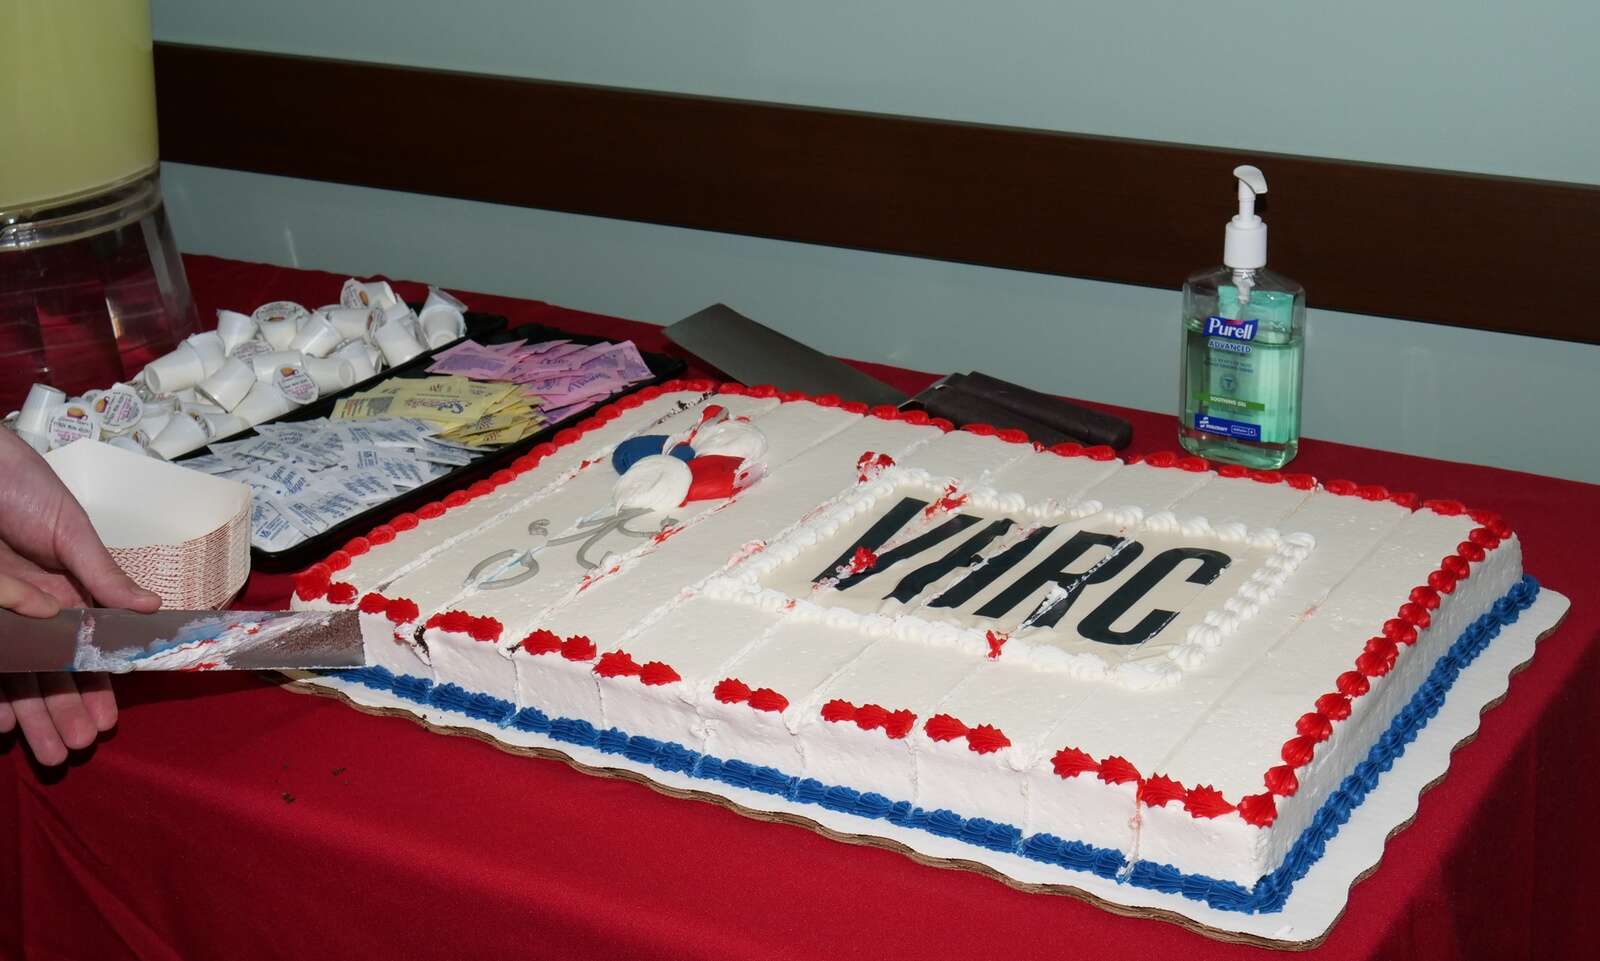 A cake celebrates the opening of the new Virtual Health Resource Center at the Abie Abraham VA Health Care Clinic